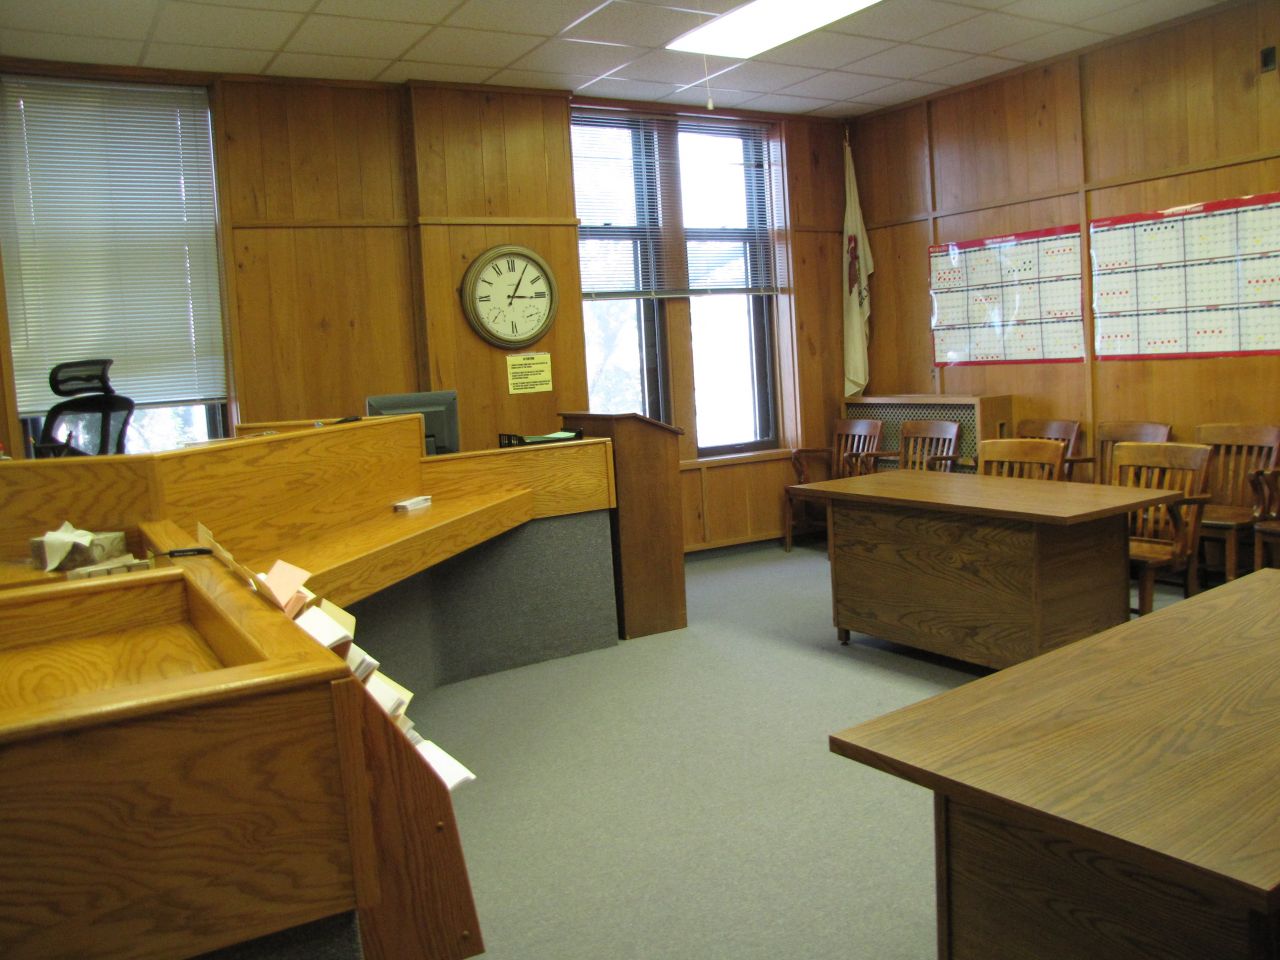 Smaller courtroom